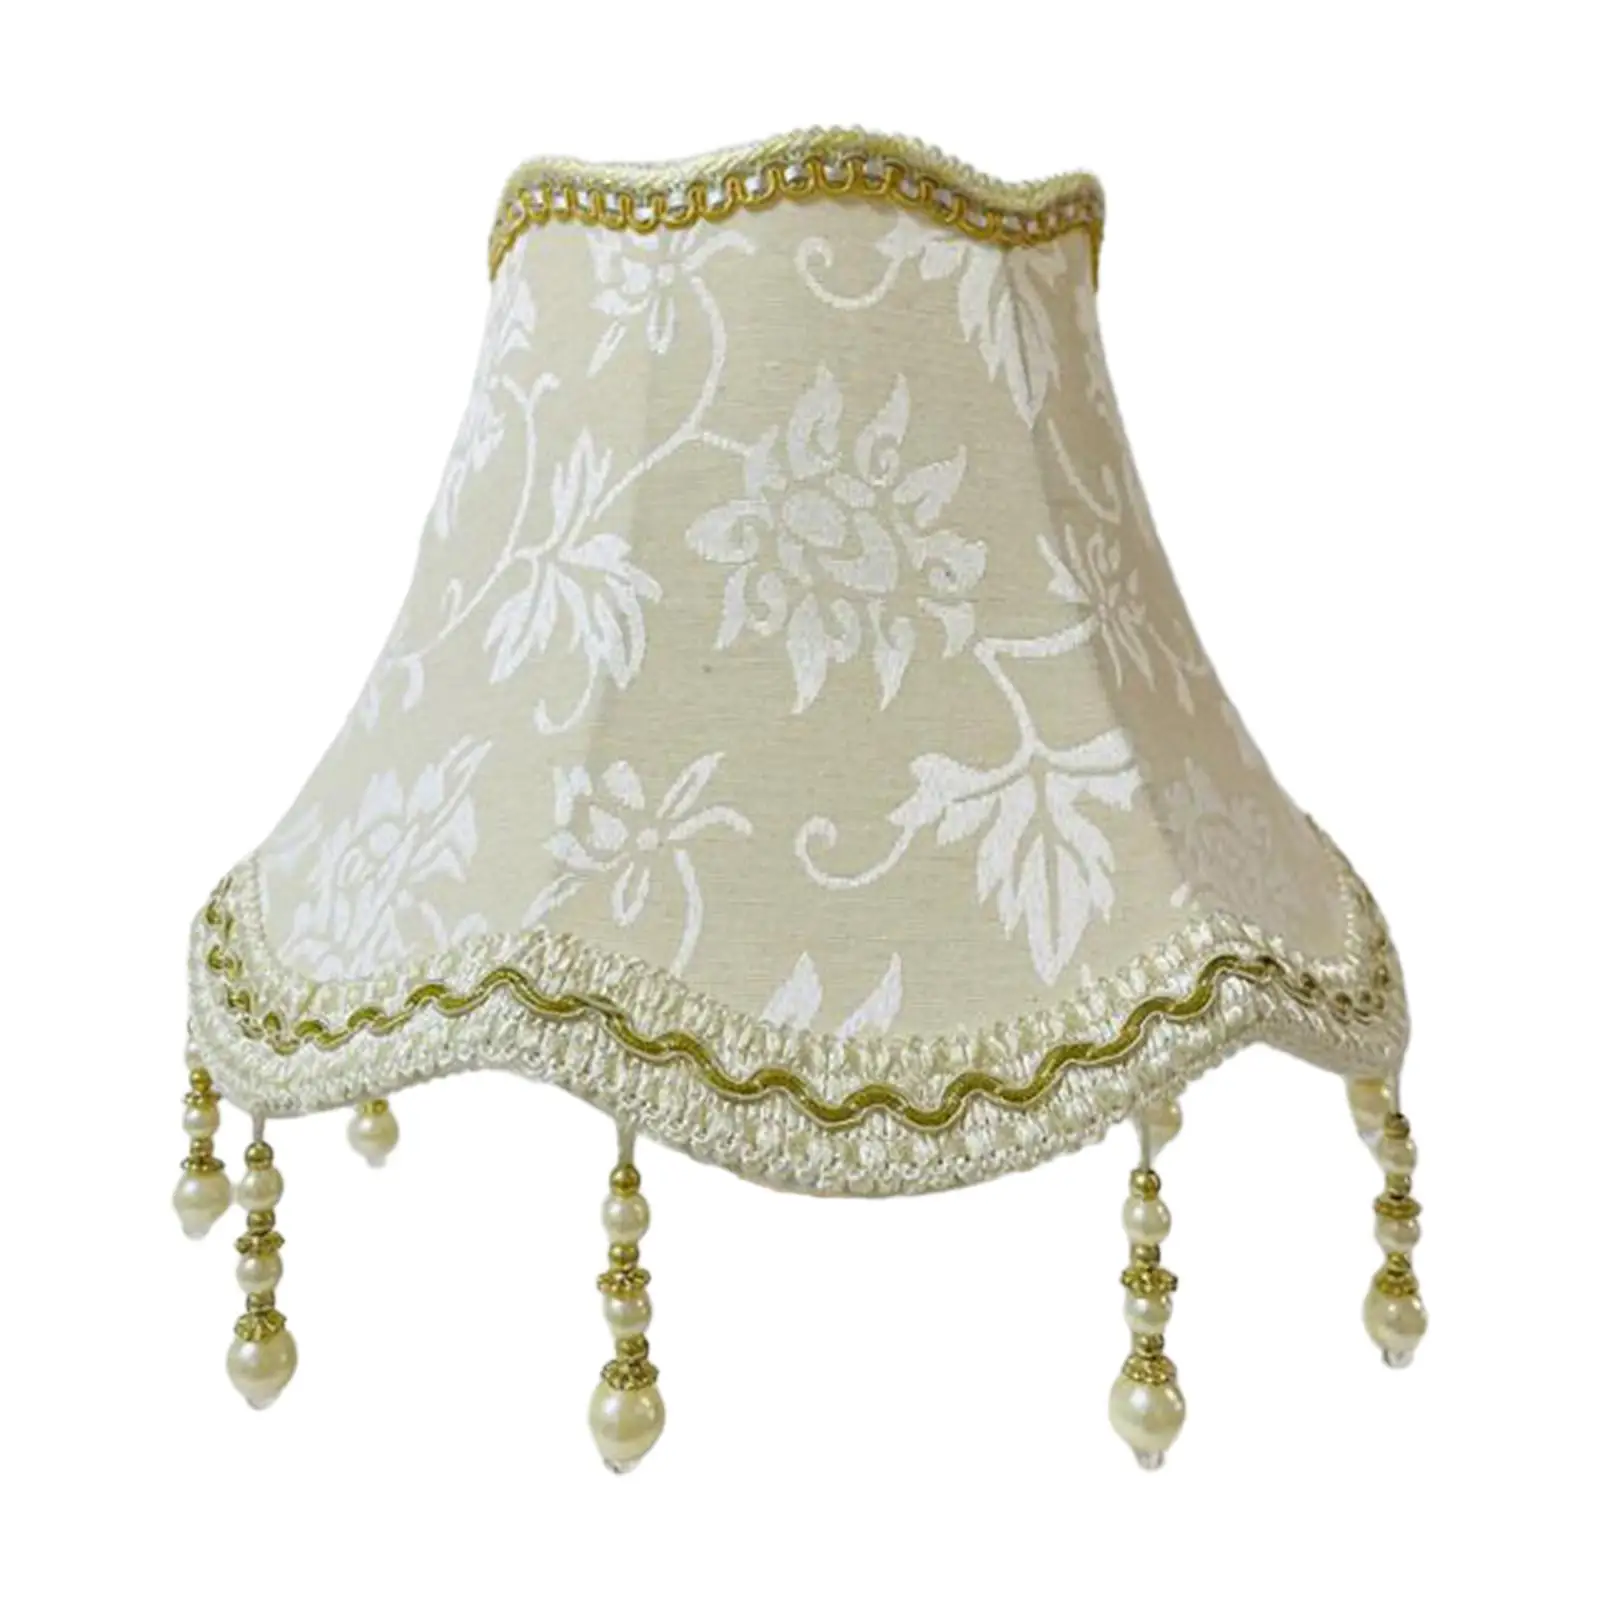 Fabric Lampshade Retro Style Pendant Lamp Shade for Bedroom Restaurant Cafe